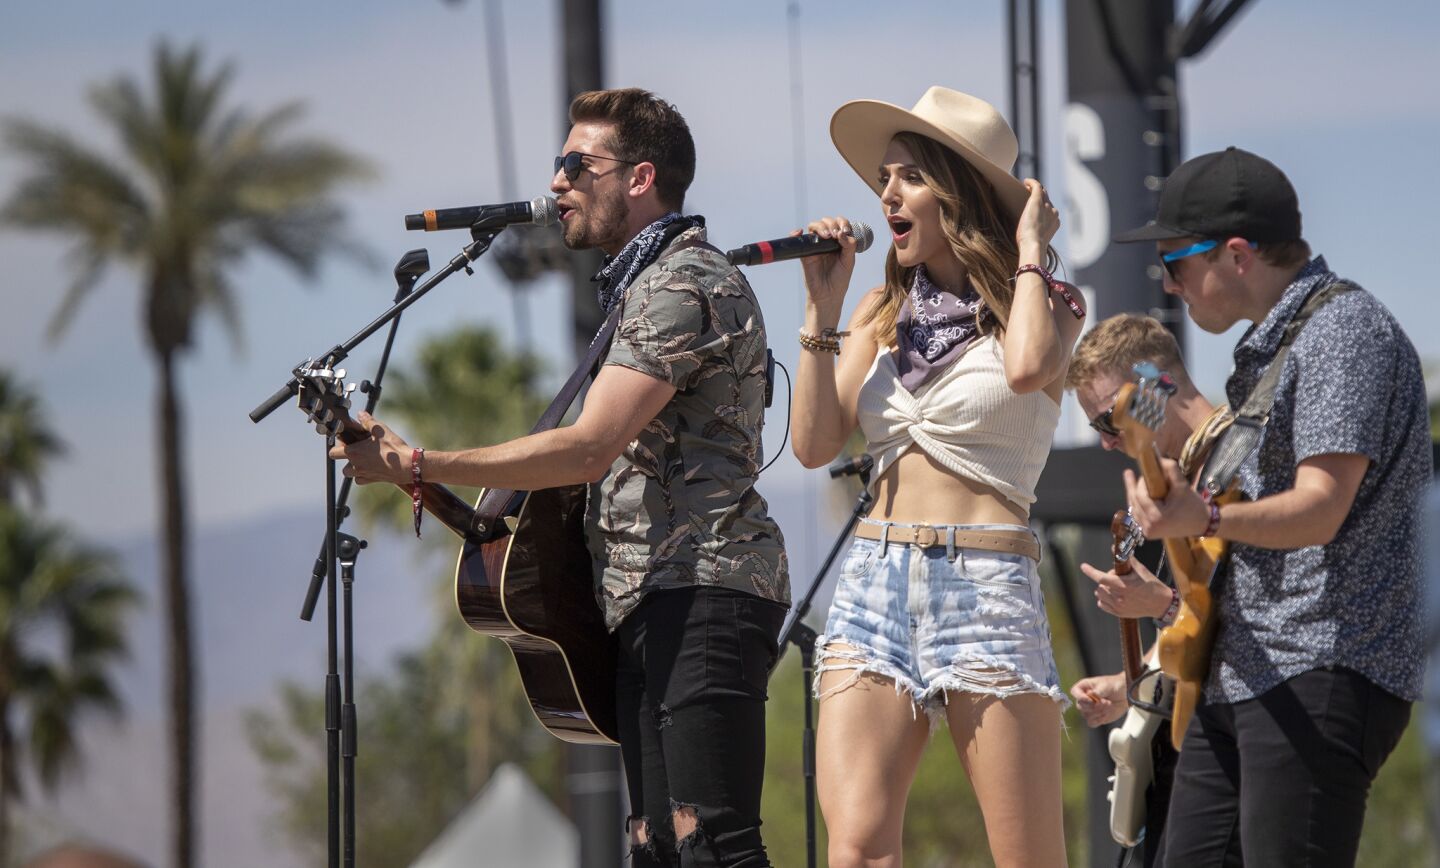 Smithfield performs on the Sirius XM Spotlight Stage on the second of the three-day 2019 Stagecoach Country Music Festival, the world's biggest country music fest, at the Empire Polo Fields in Indio, Calif., on April 27, 2019. Stagecoach fans have the chance to watch some 75 performers and DJs over three days.